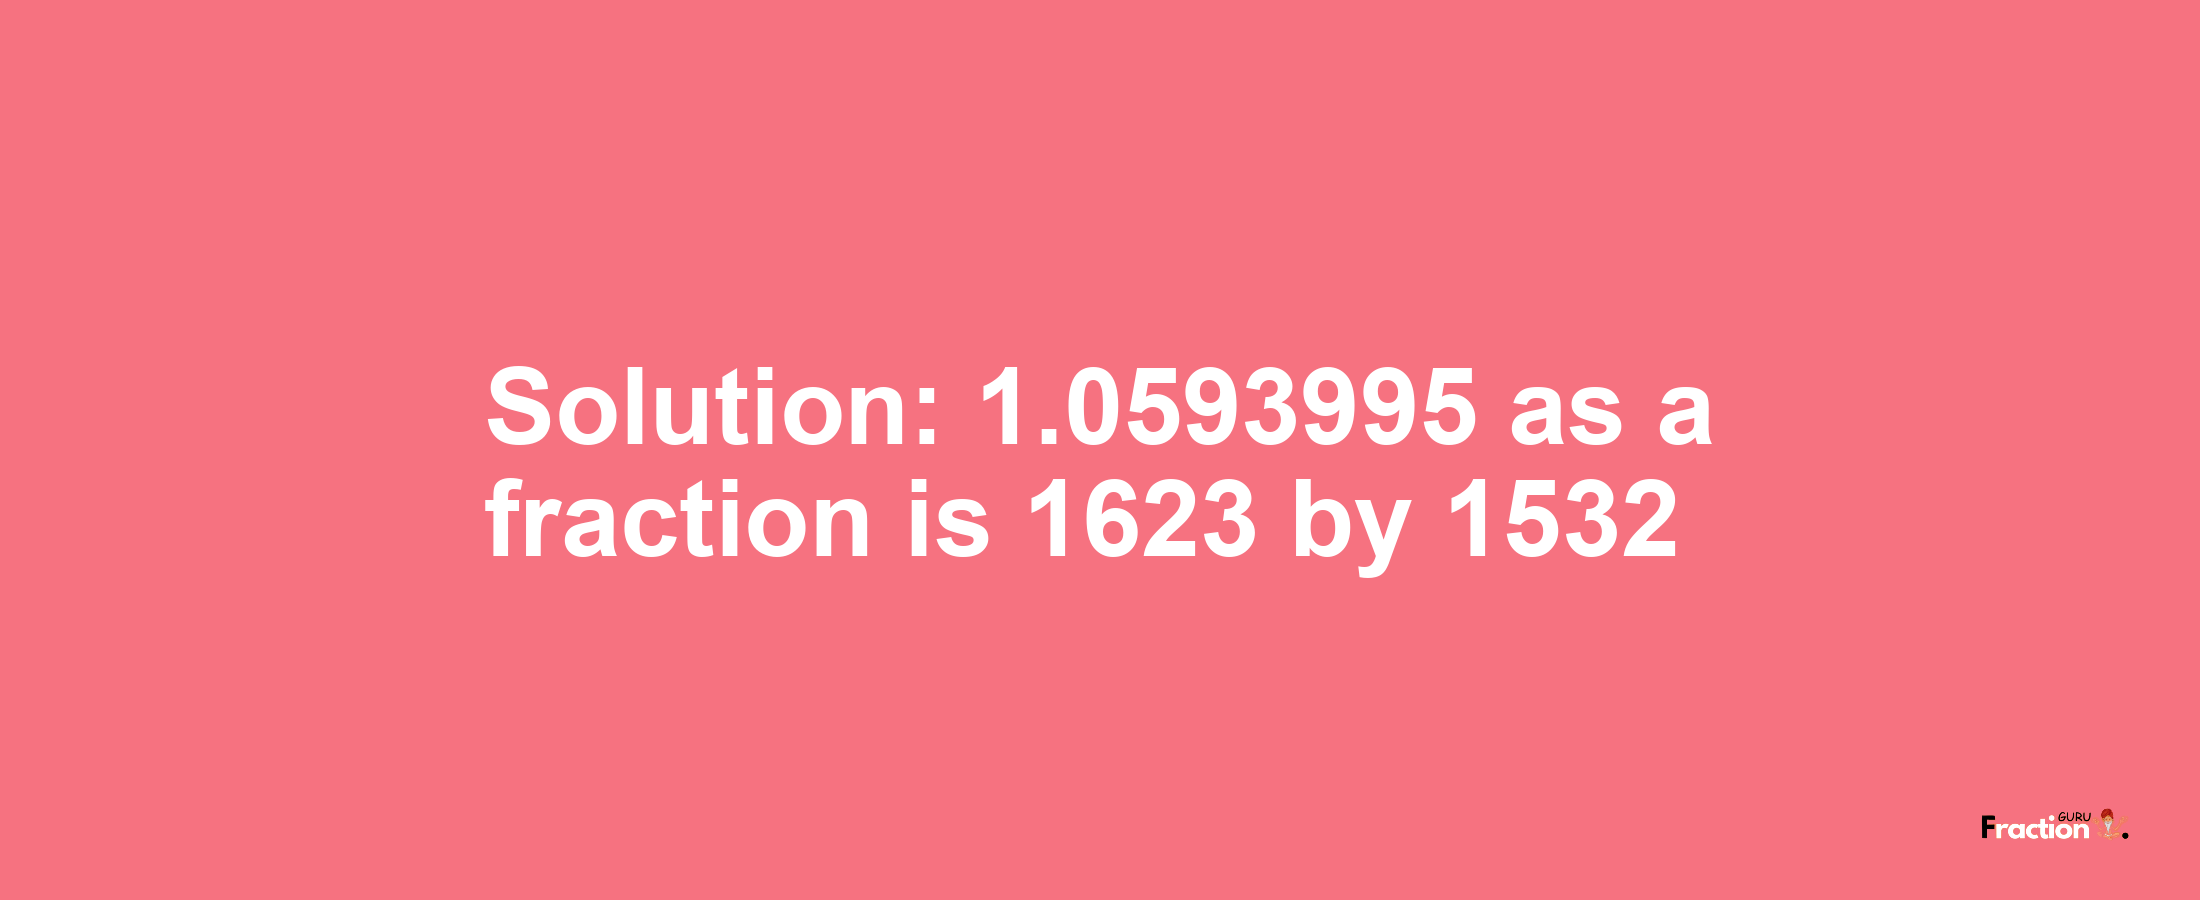 Solution:1.0593995 as a fraction is 1623/1532